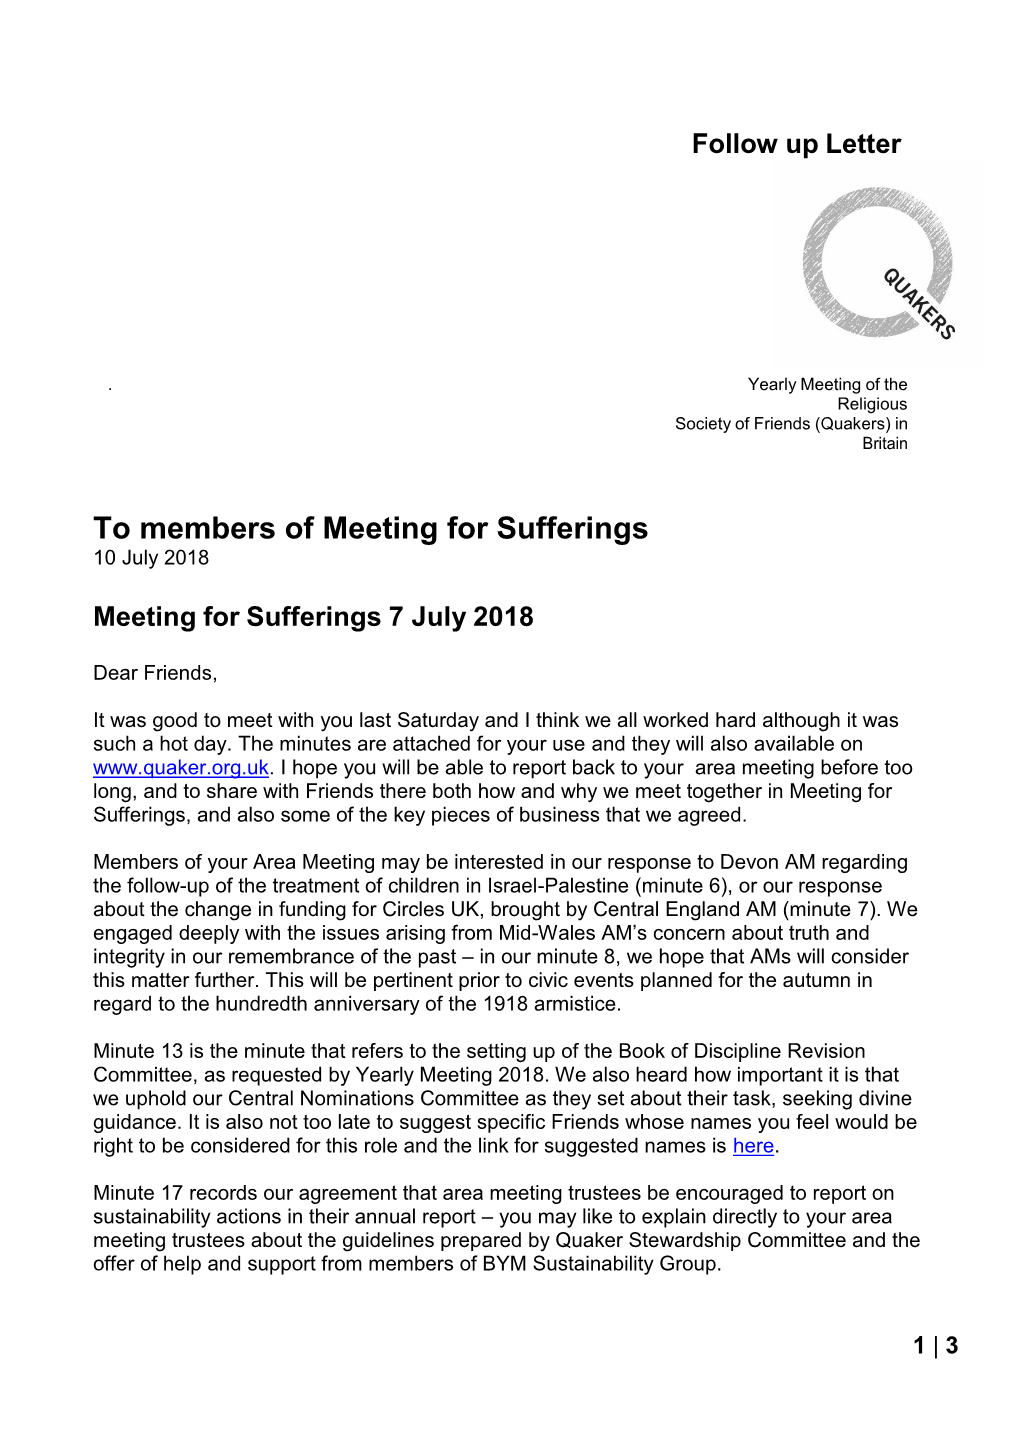 To Members of Meeting for Sufferings 10 July 2018